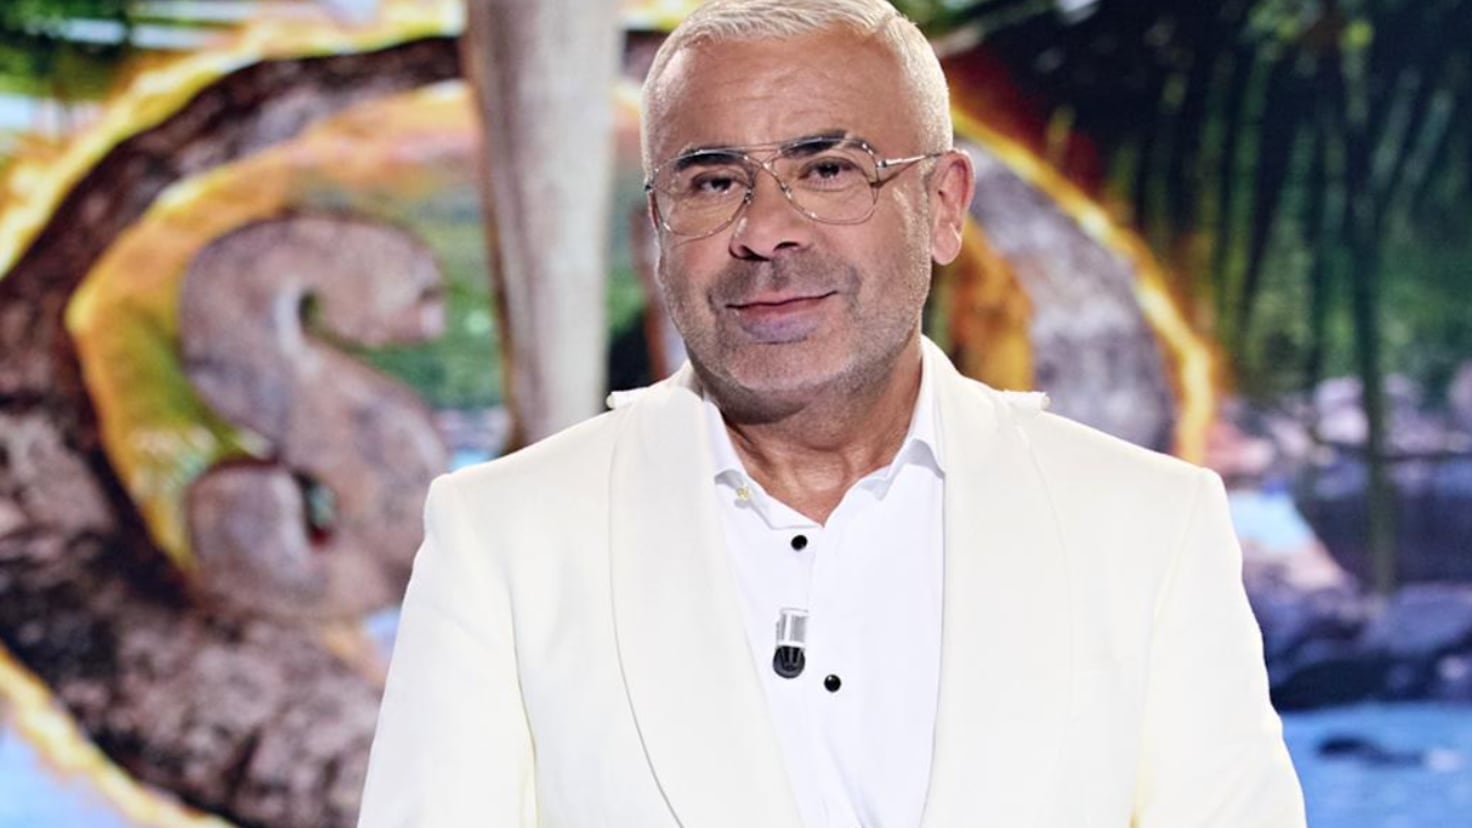 Mediaset once again bets on Jorge Javier Vzquez with two new programs on Telecinco
